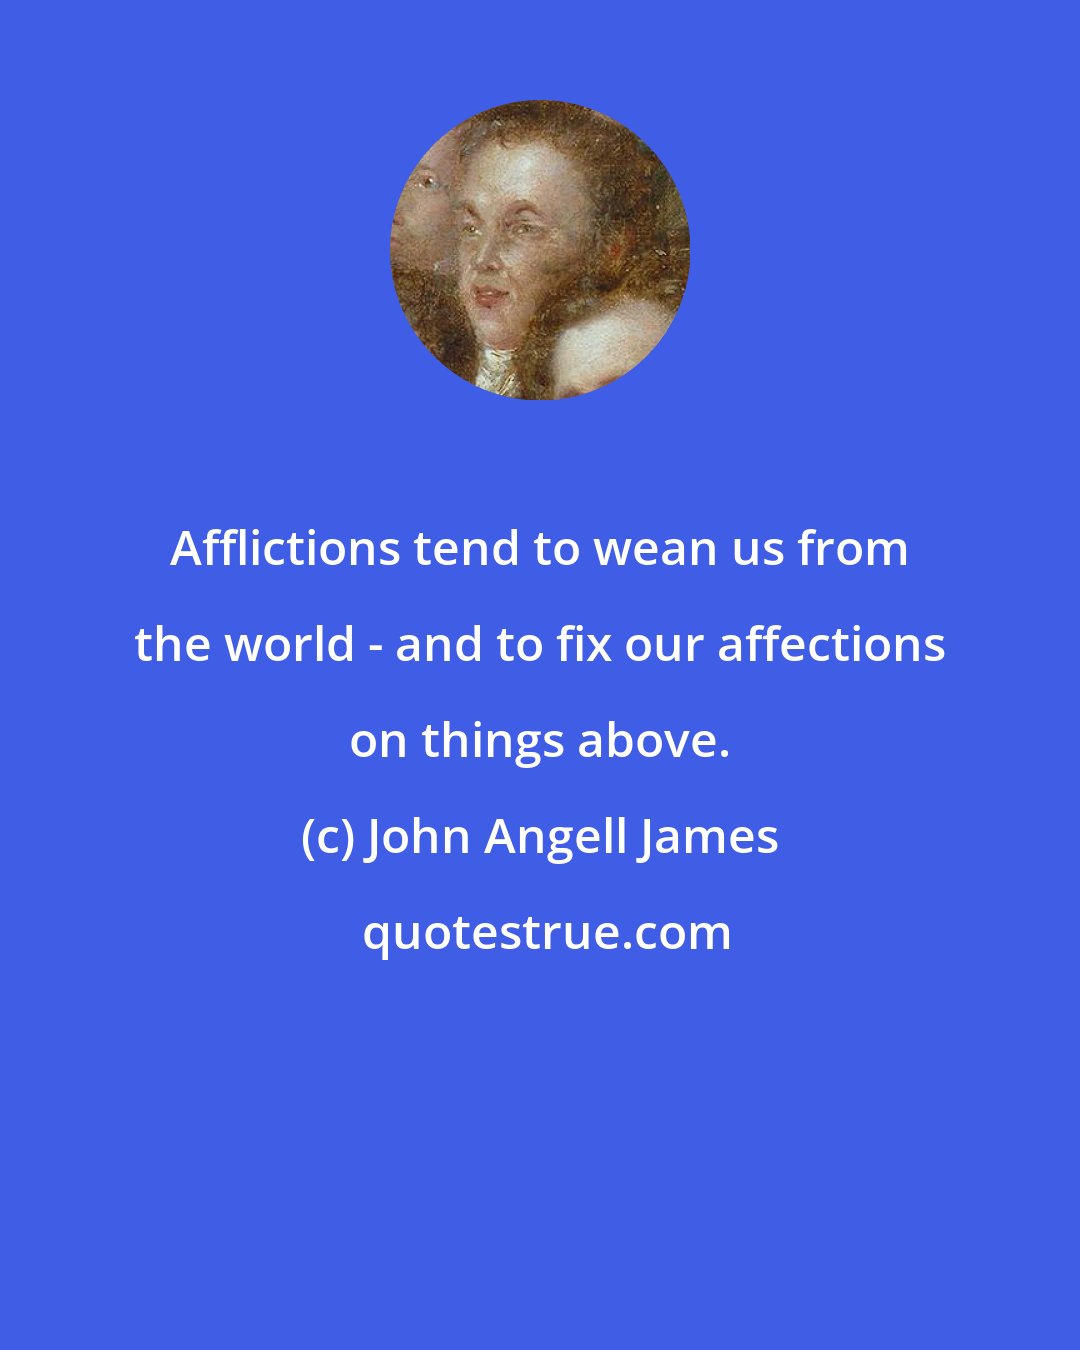 John Angell James: Afflictions tend to wean us from the world - and to fix our affections on things above.